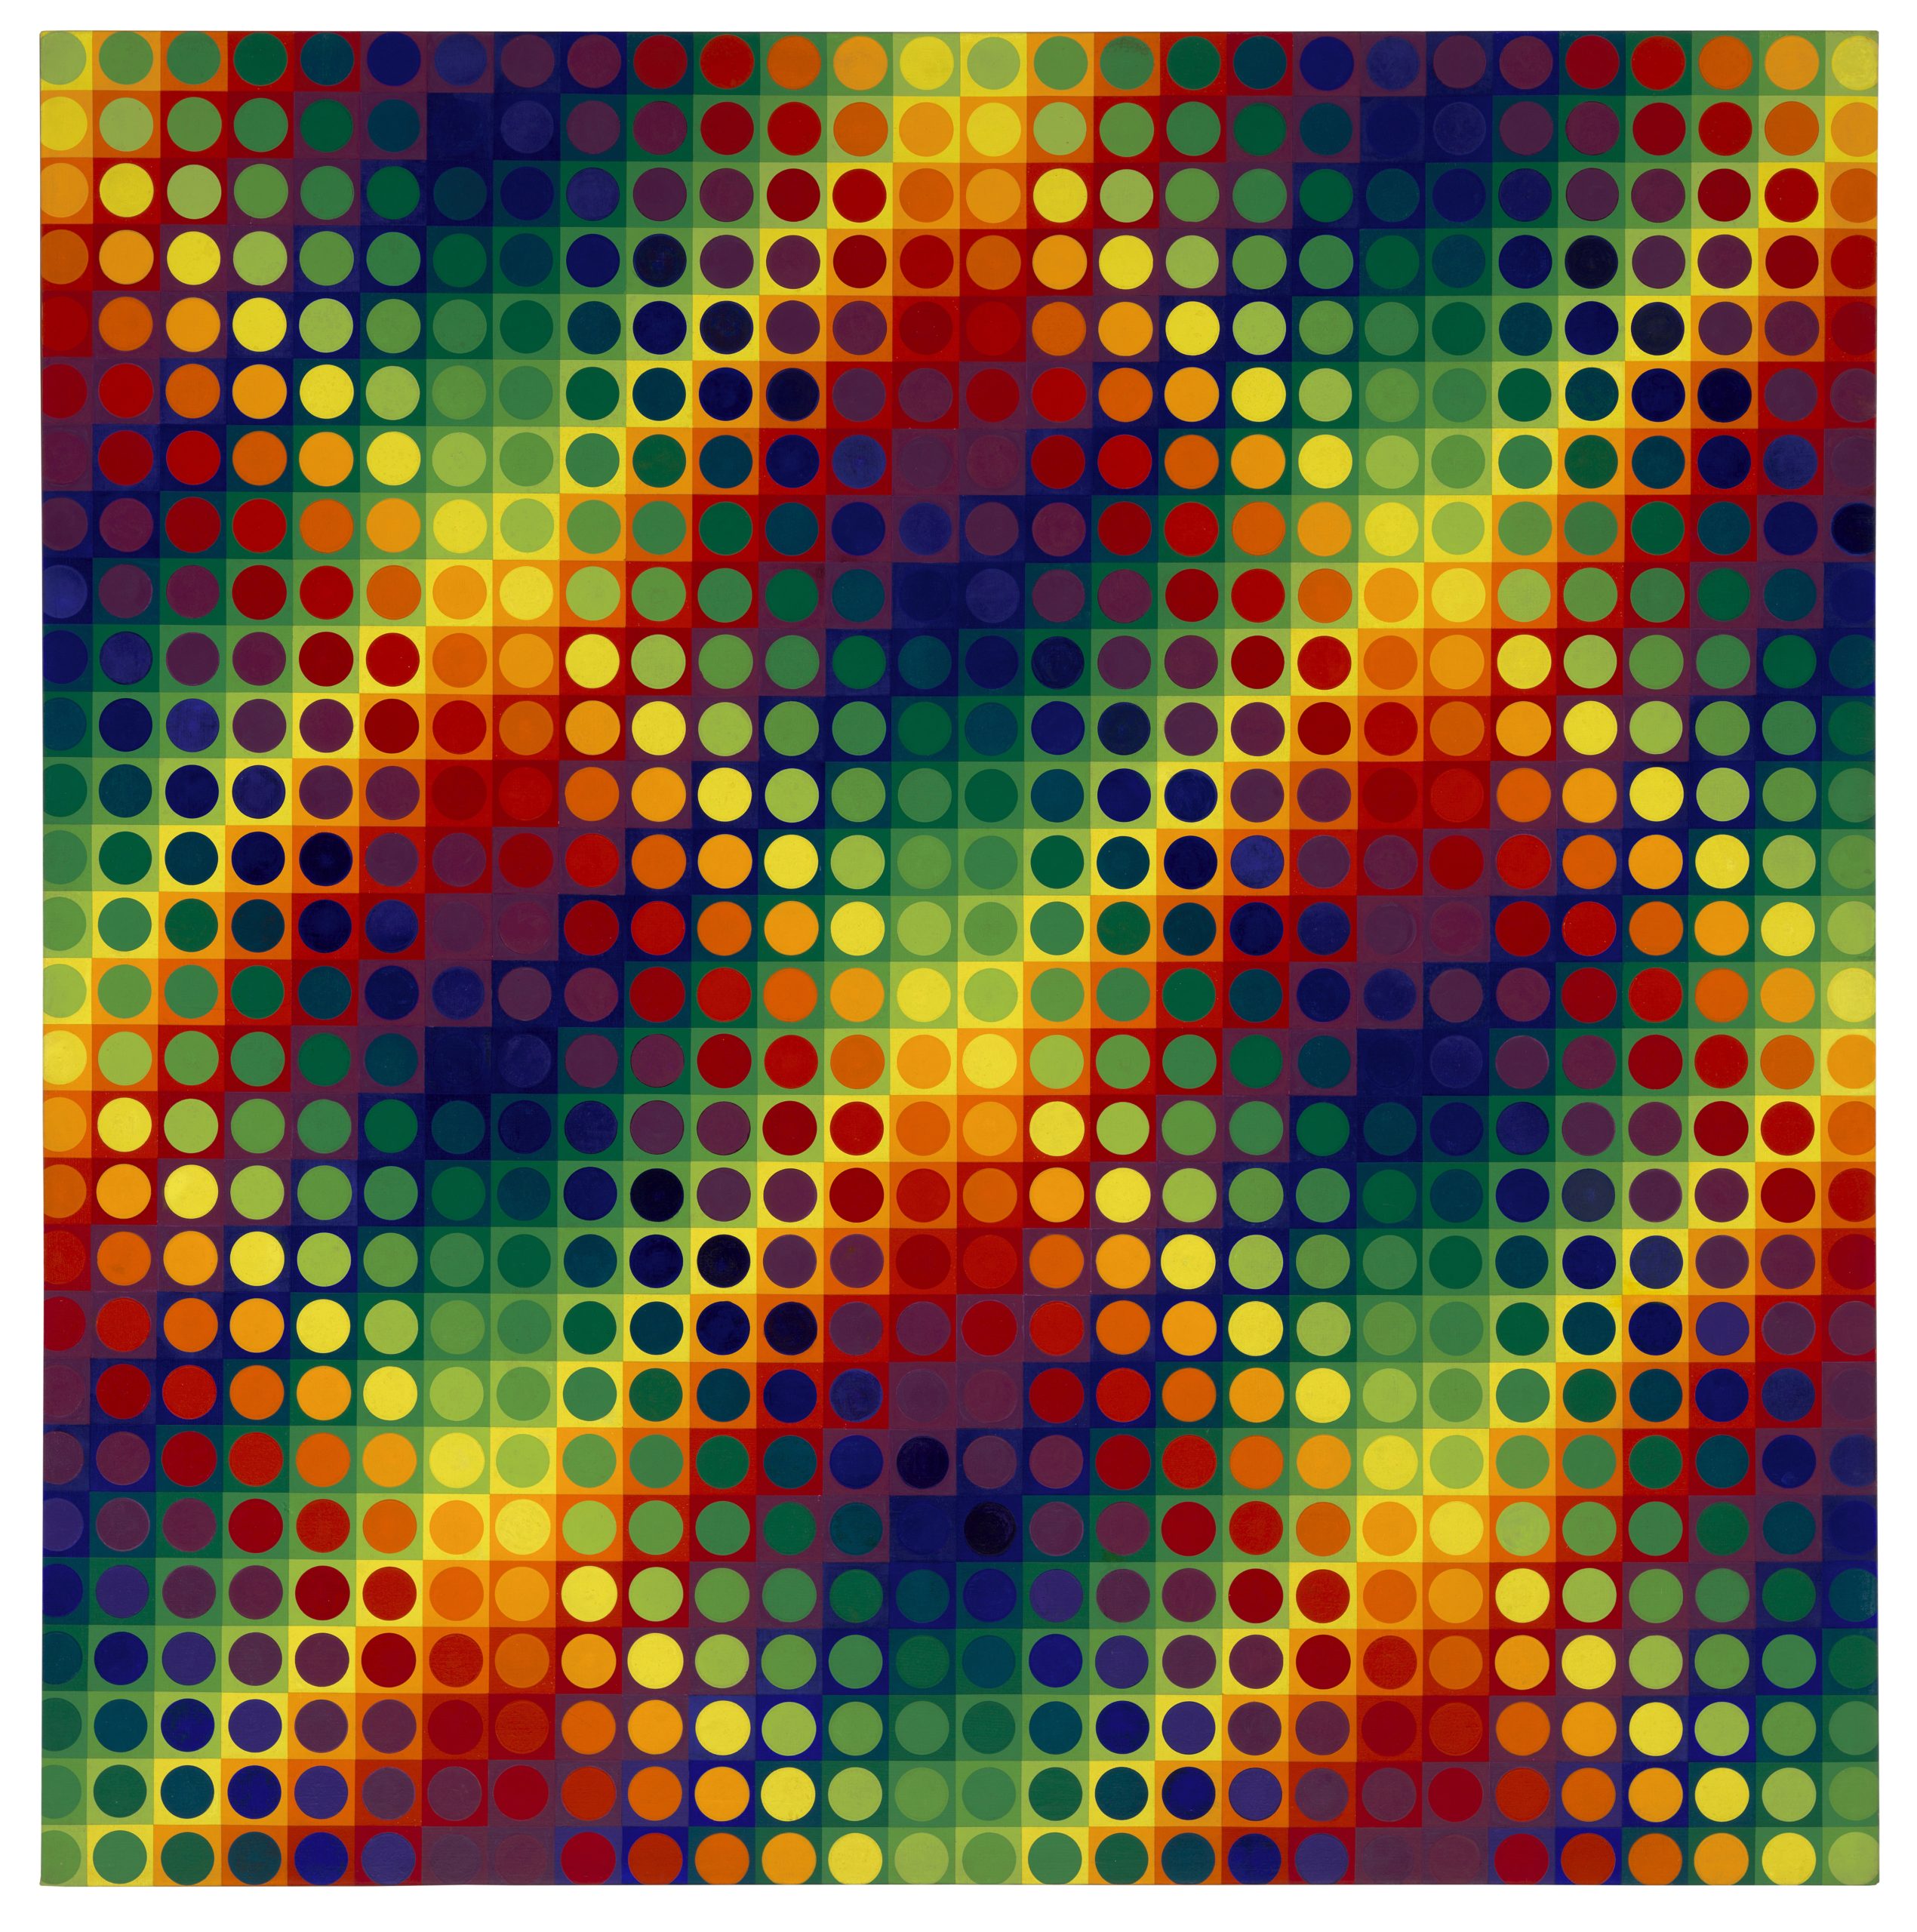 An abstract painting of various colored circles on squares, laid in a grid making visual cross hatches.